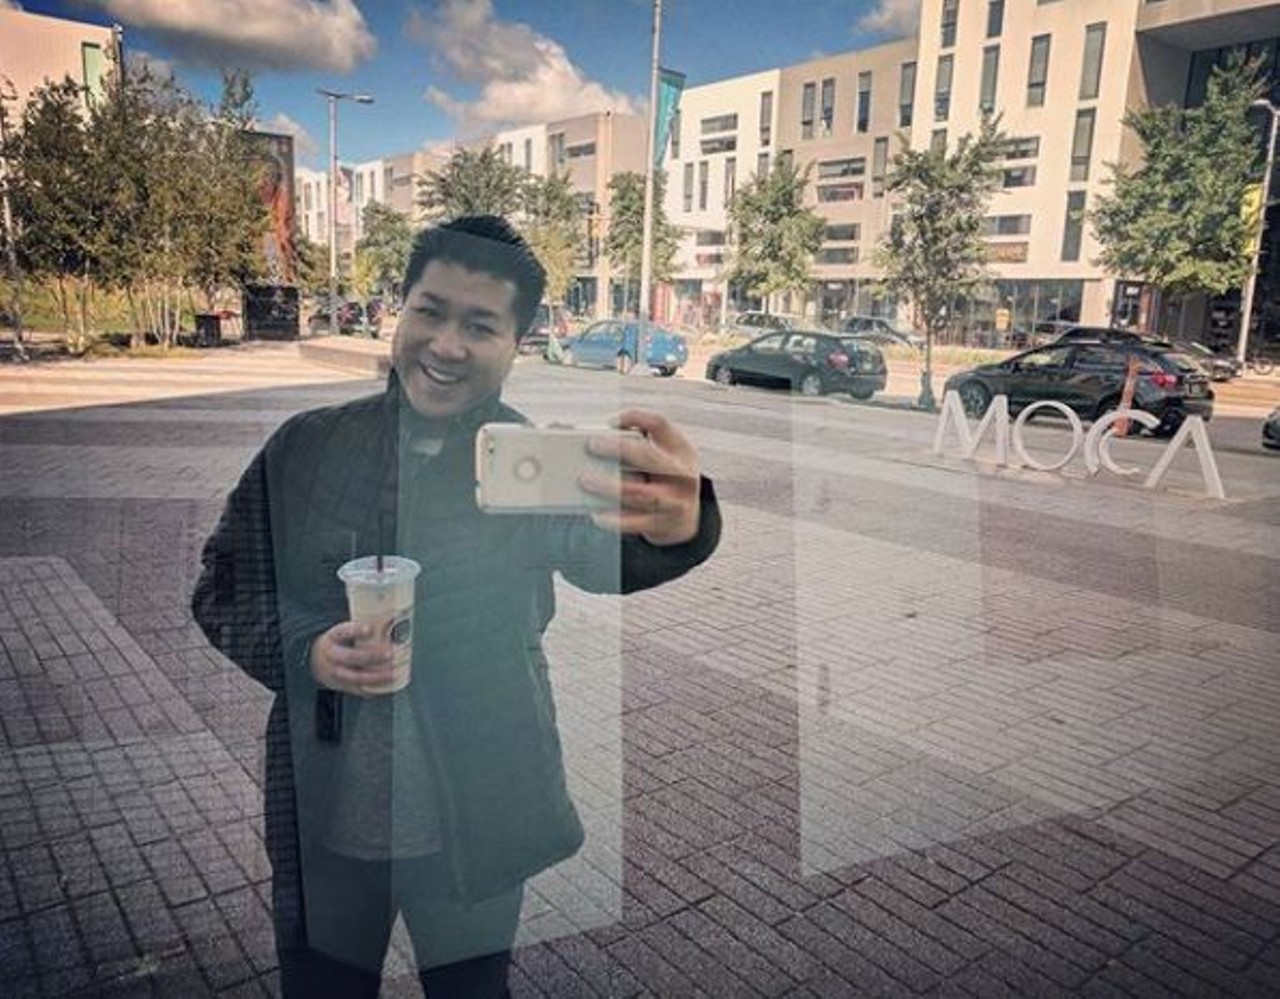  Museum of Contemporary Art
11400 Euclid Ave.
This museum is known for having some awesome exhibitions, all of which are selfie-worthy. But one thing that doesn&#146;t change is the reflective exterior of its building, perfect for a loophole mirror selfie.
Photo via phantasticfantasy/Instagram